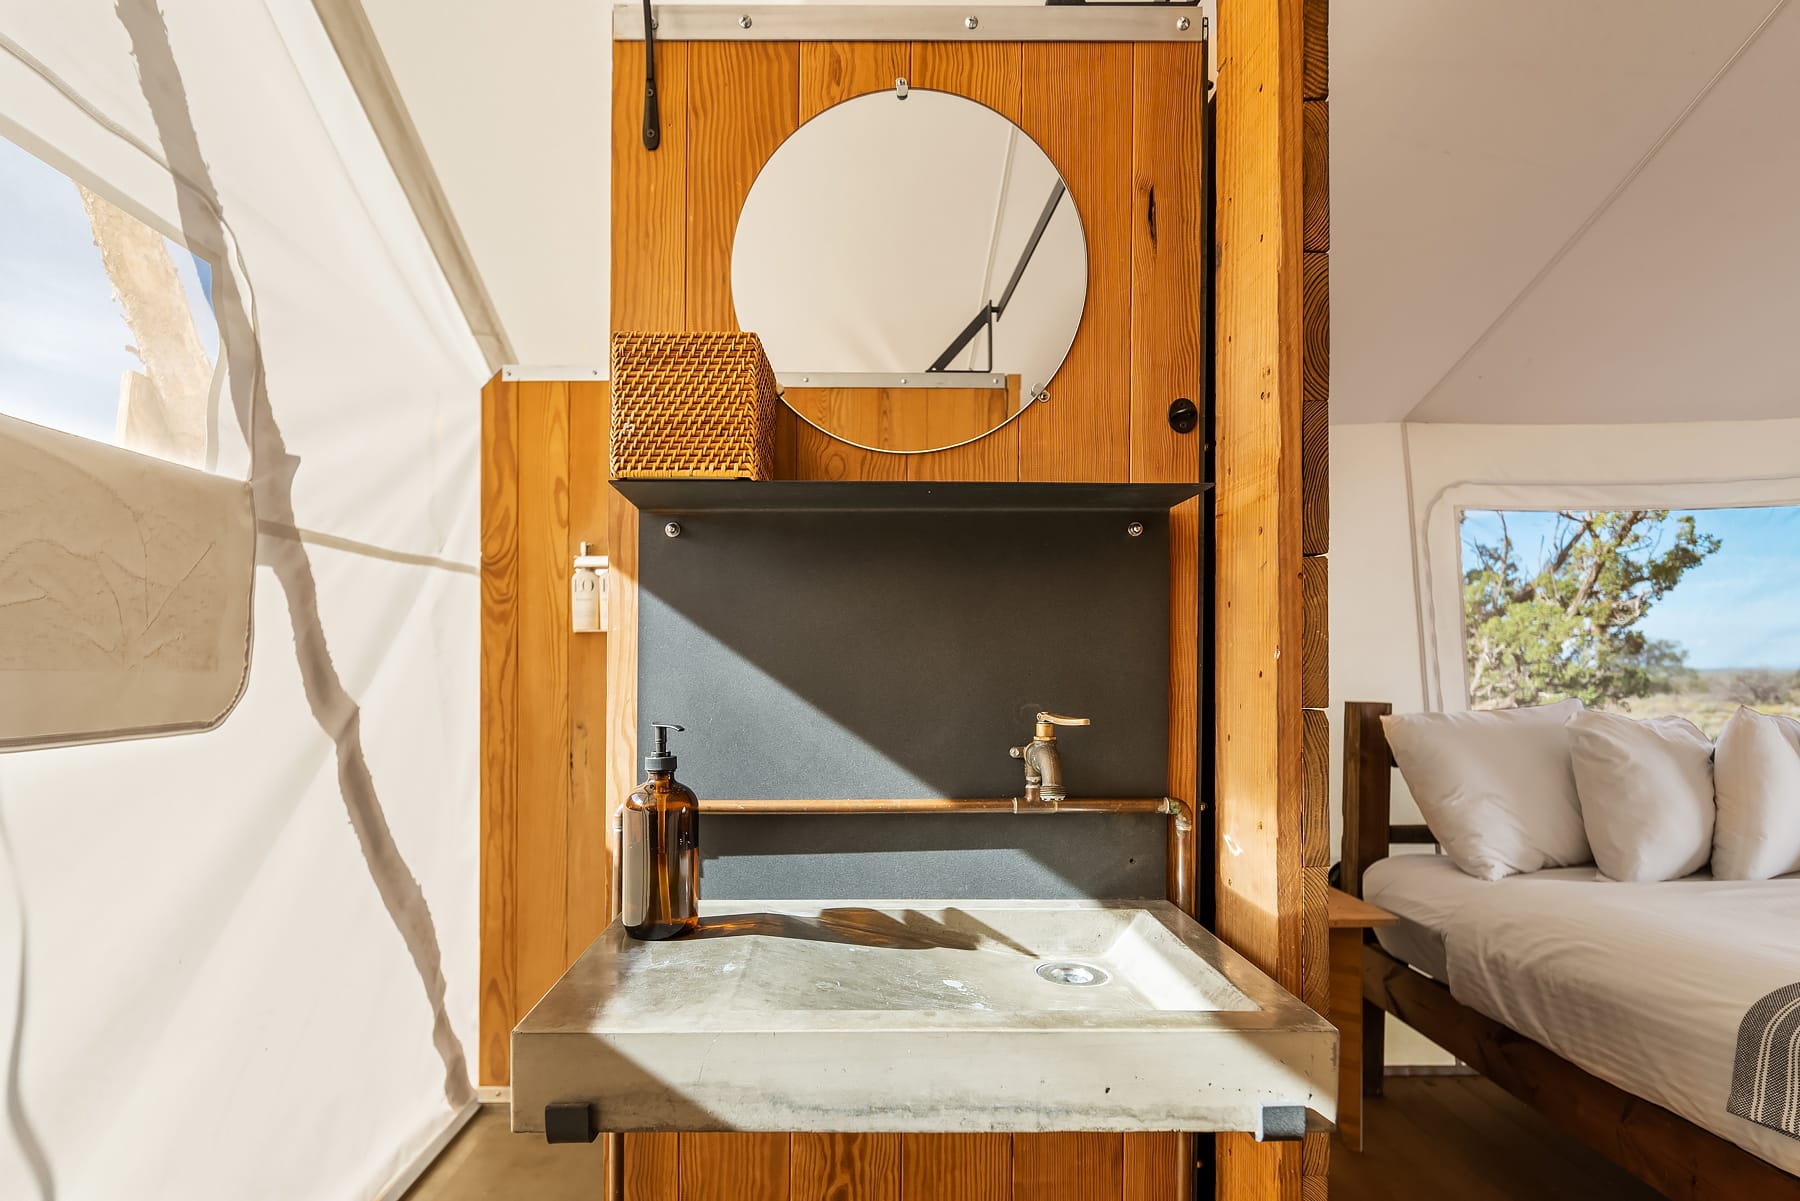 View of Deluxe Bathroom Sink at Under Canvas Grand Canyon